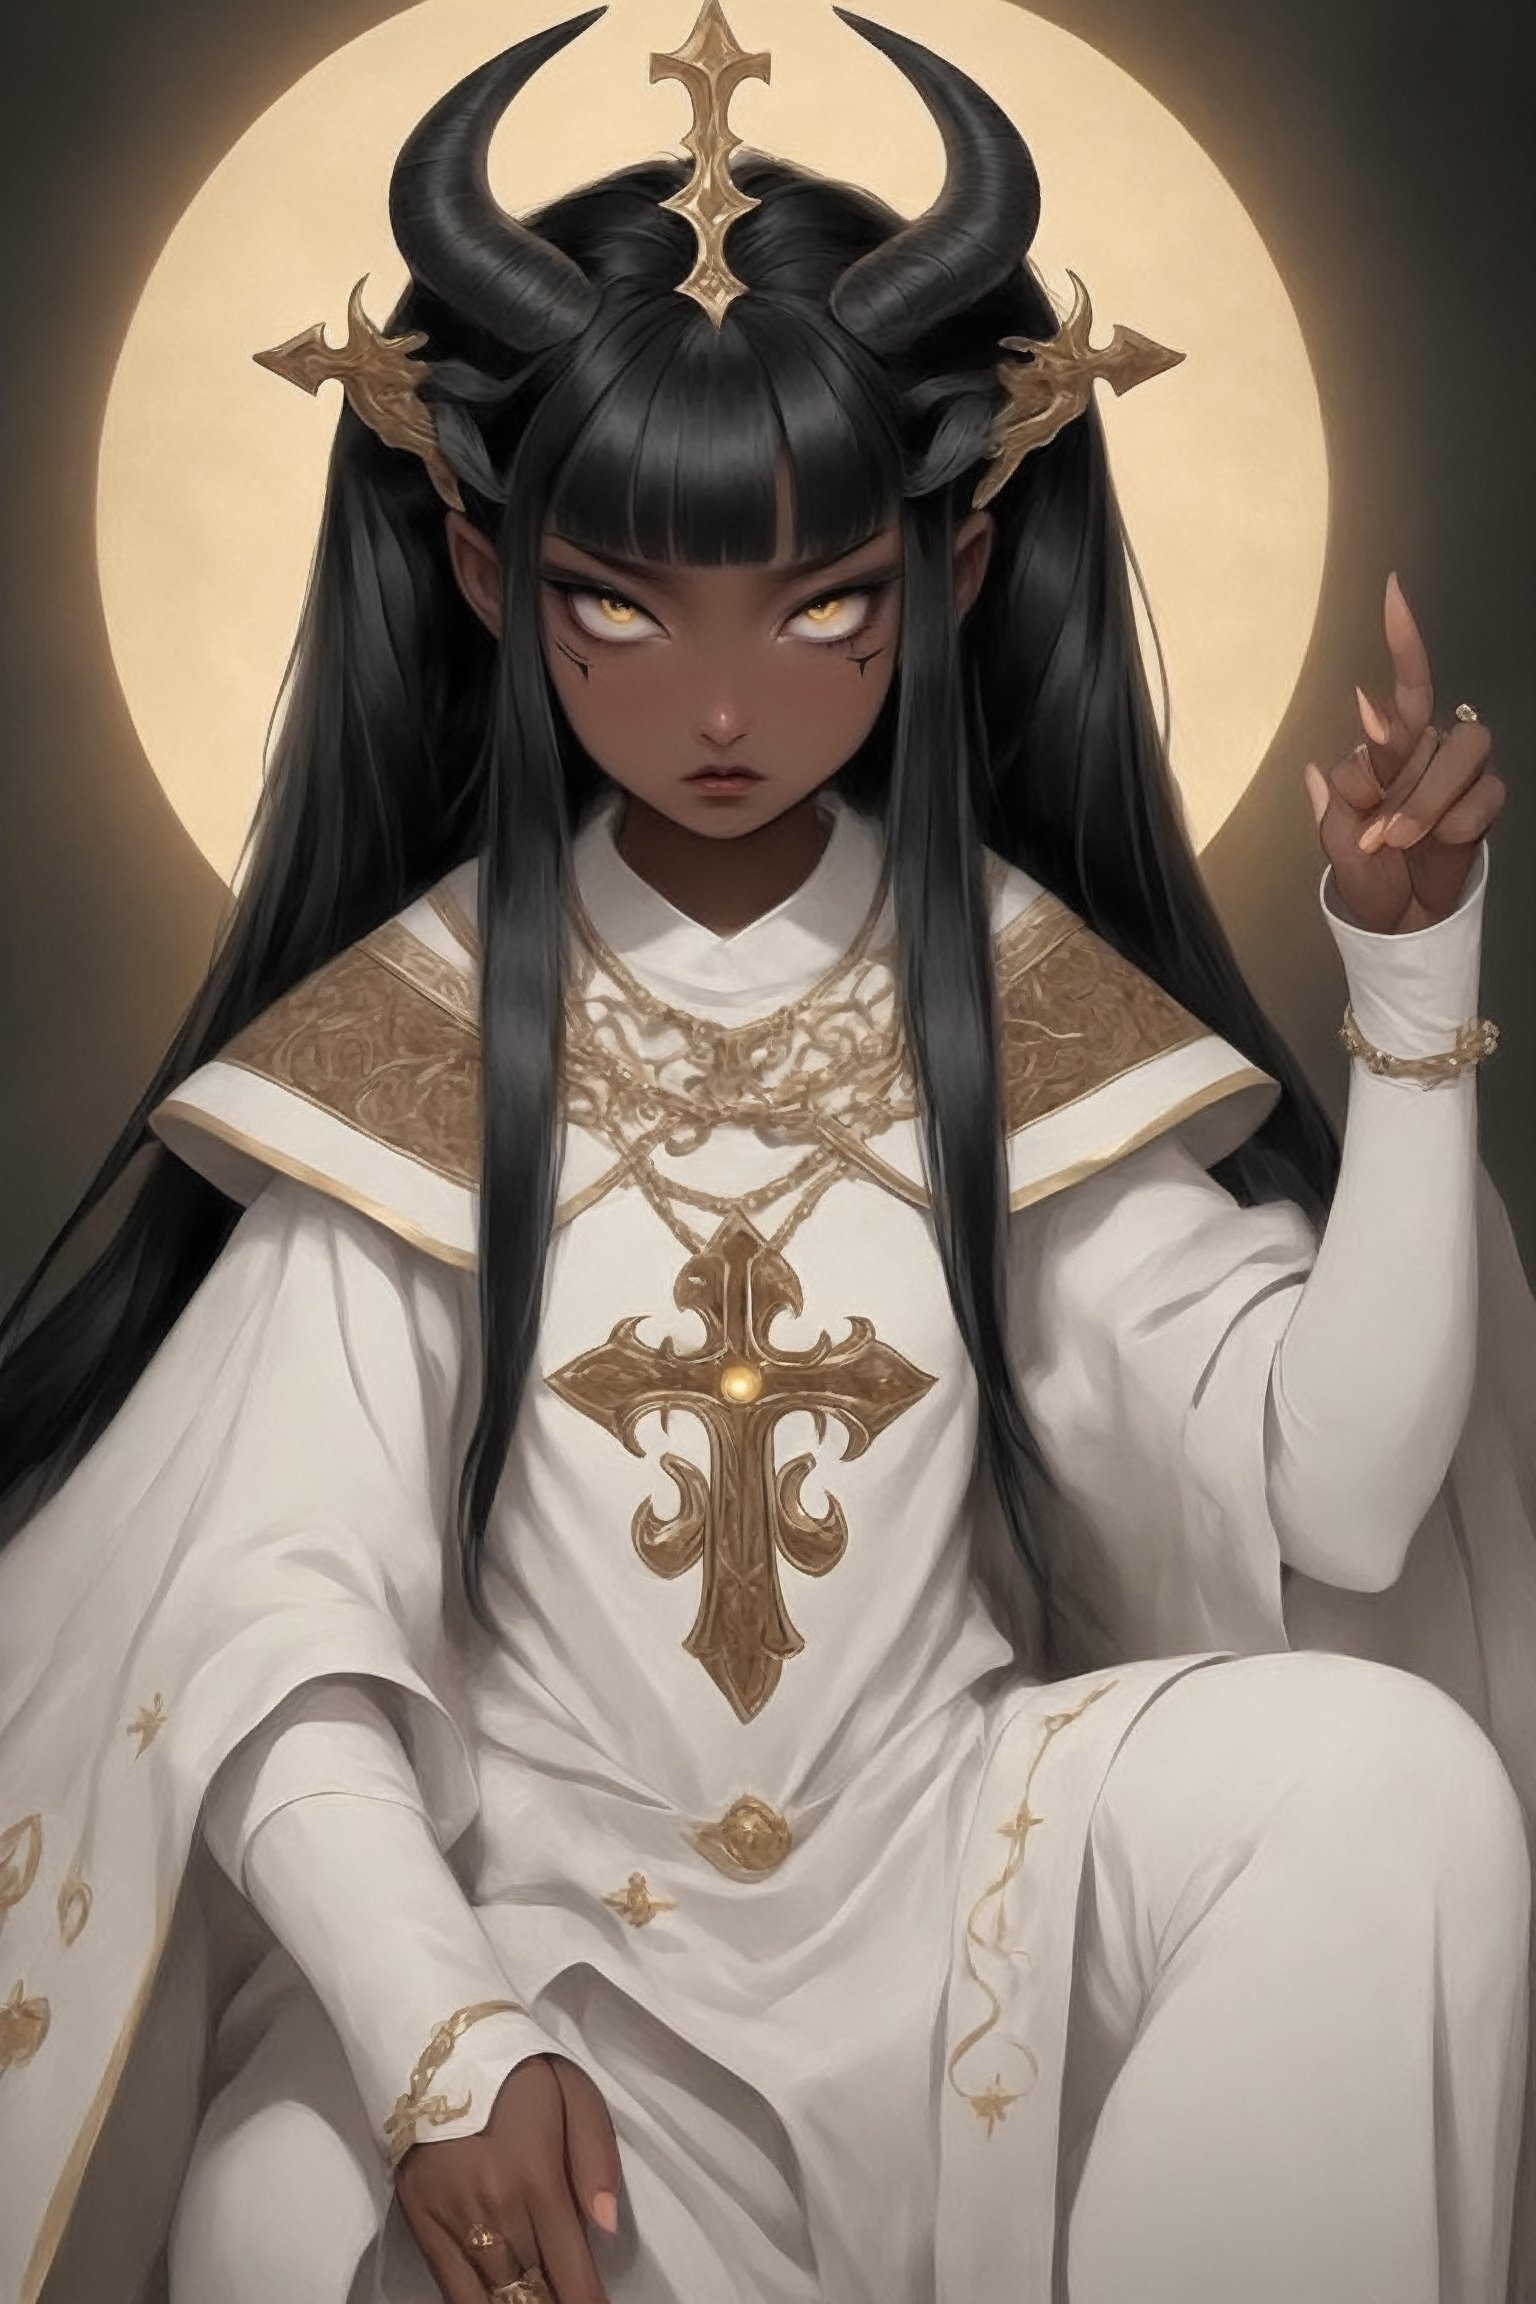 1 girl,supernatural being,(masterful),melanism demon girl,slit pupil eyes,Intricate Iris Details,,ebony skin,pure white pigtails, wearing solemn white and gold ceremonial robes, (majestic bishop's mitre),Envision the pontiff's attire enriched by intricate golden embroidery, sacred symbols,Utra,ellafreya,GothEmoGirl,glitt3r